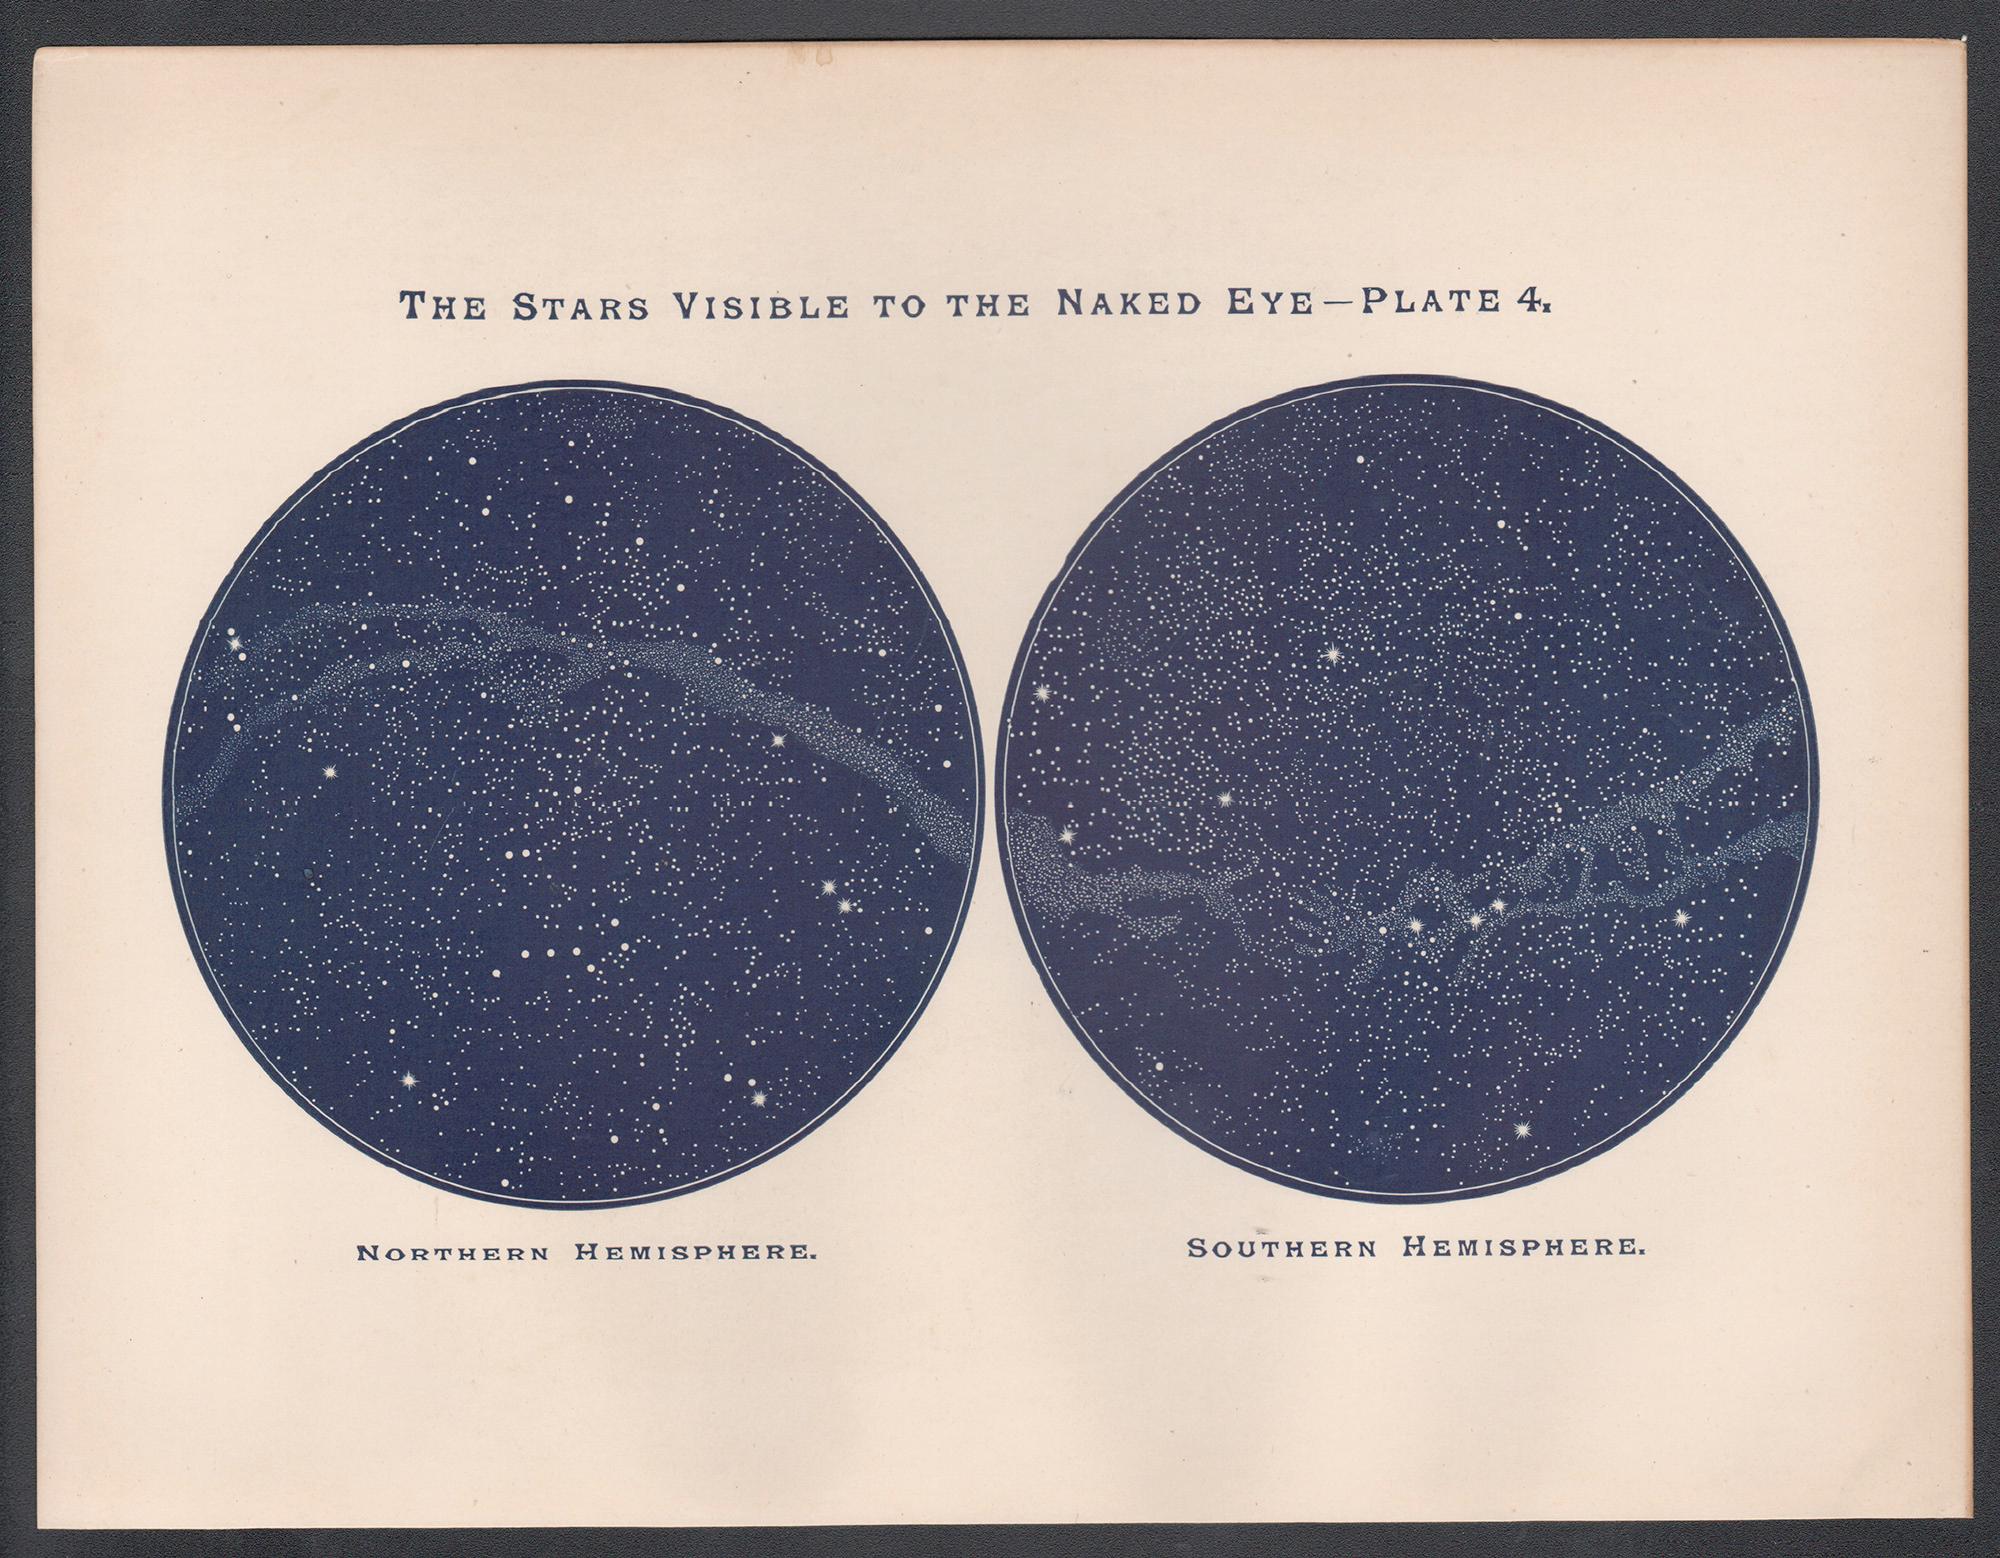 The Stars Visible to the Naked Eye. Antique Astronomy print - Print by William Peck